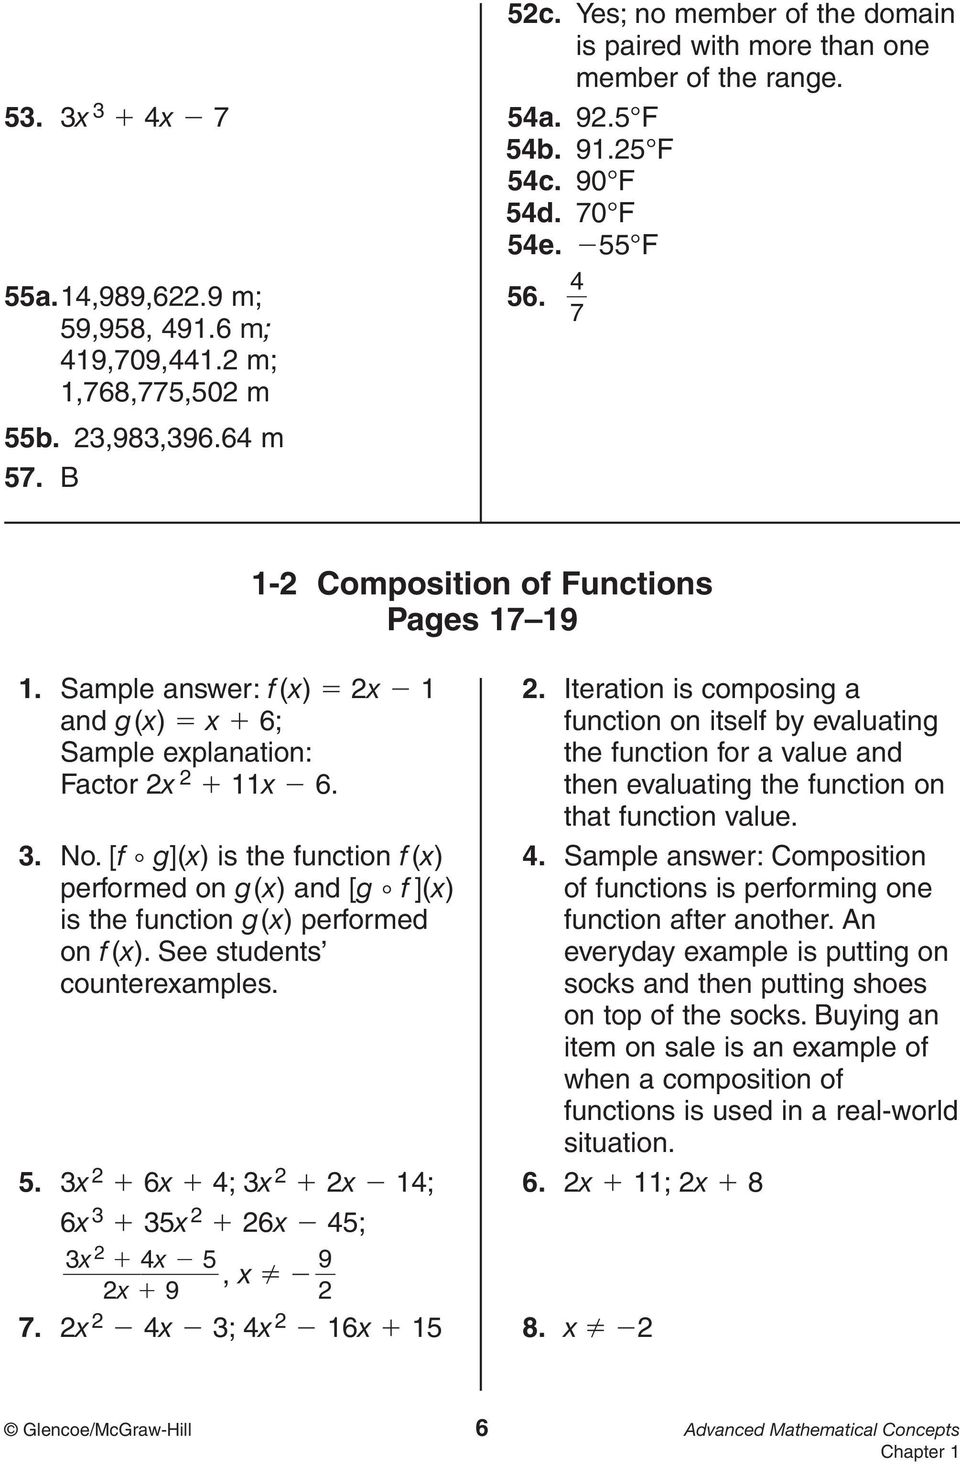 Iteration is composing a and g() 6; function on itself b evaluating Sample eplanation: the function for a value and Factor 6. then evaluating the function on that function value.. No.